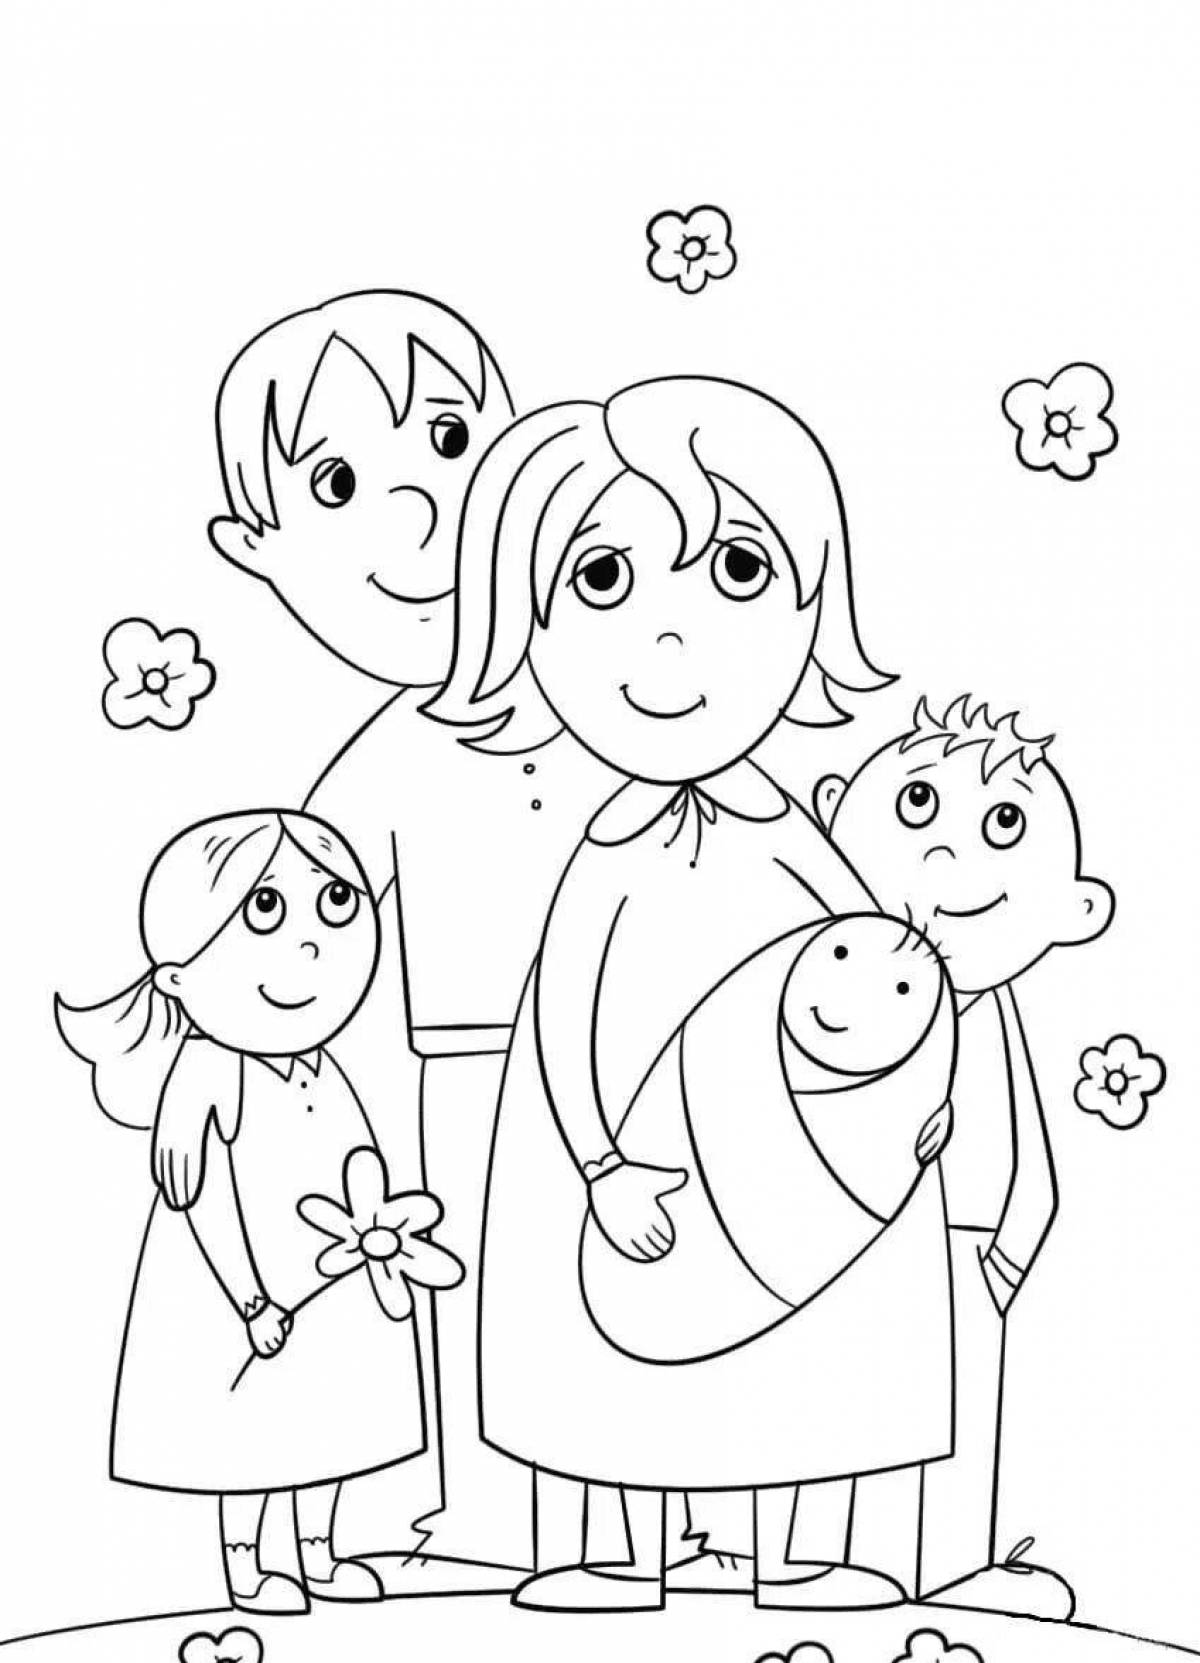 Sunny family coloring book